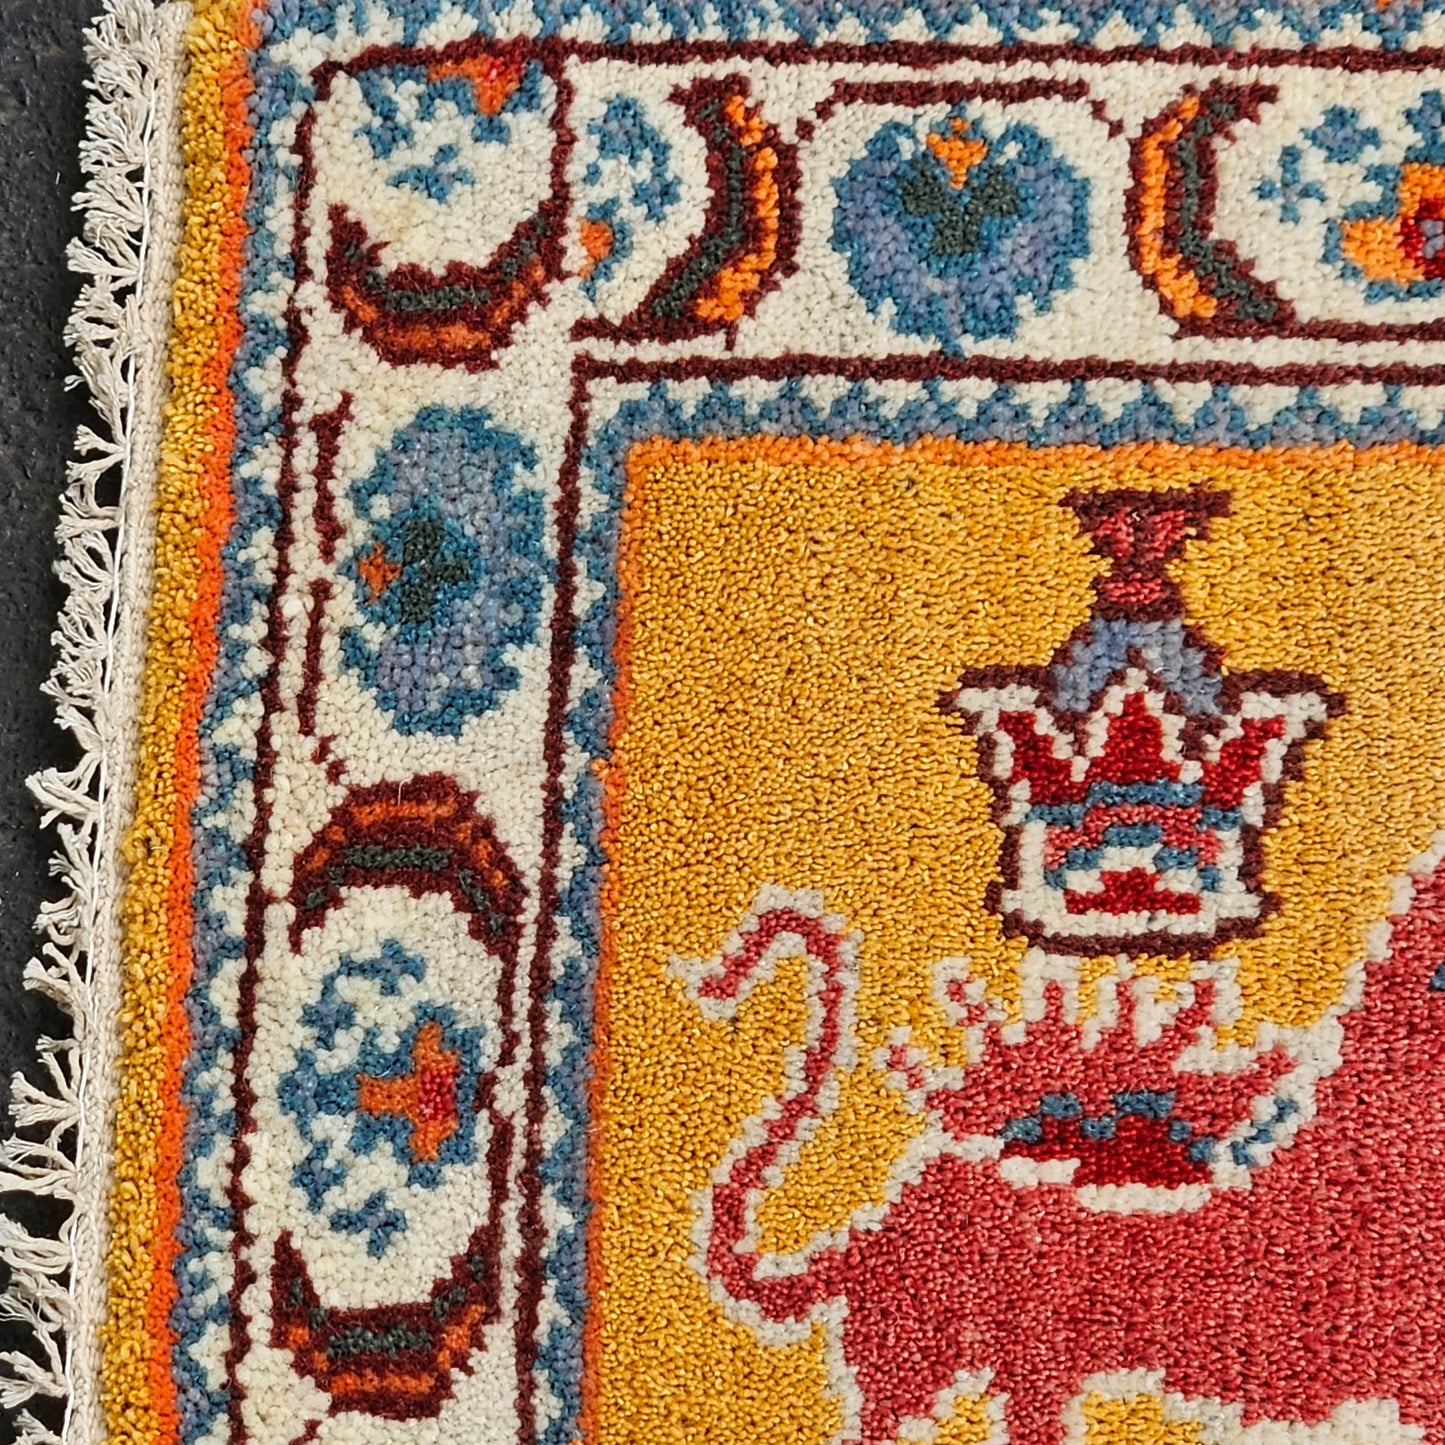 Asian Guardian Lions Themed Turkish Hand Knotted 100% Wool Rug / Carpet - 2' x 3'